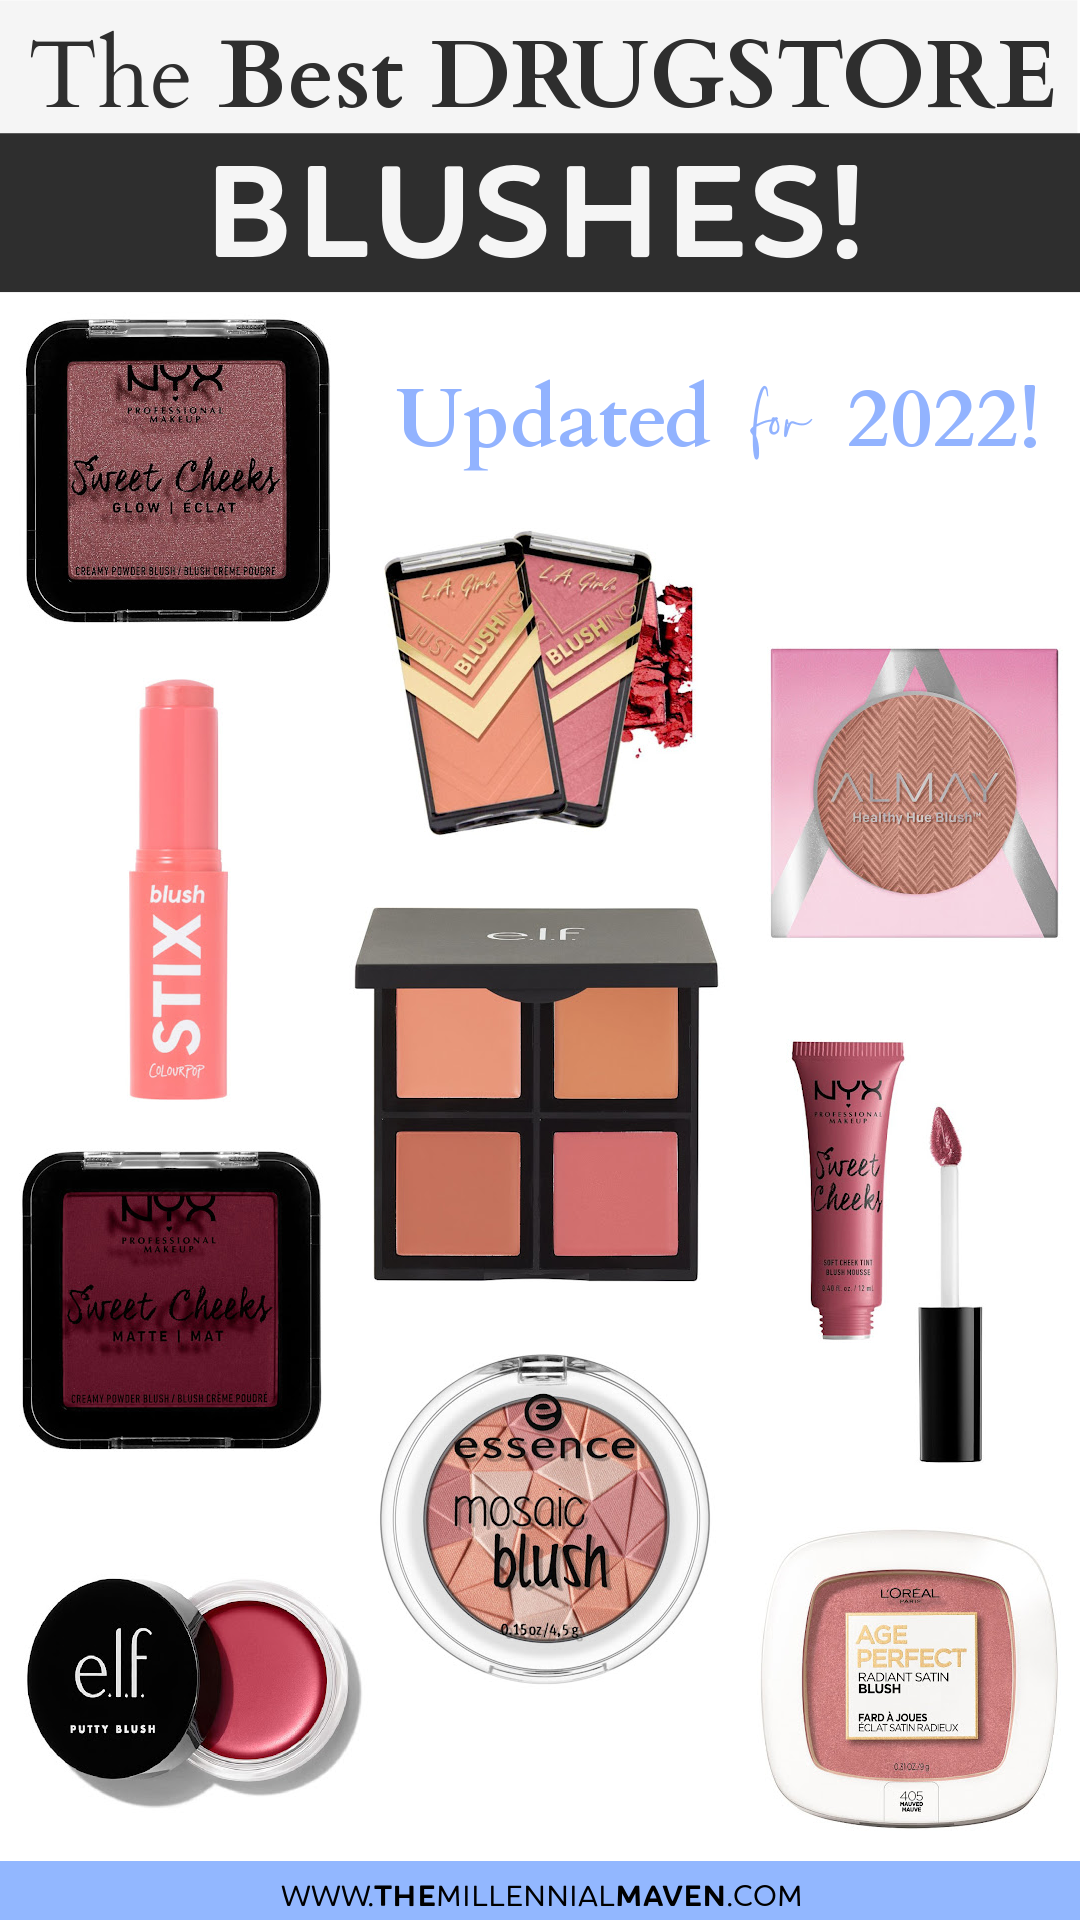 Top 10 Best Blushes at the Drugstore in 2022! | Best Drugstore Blushes